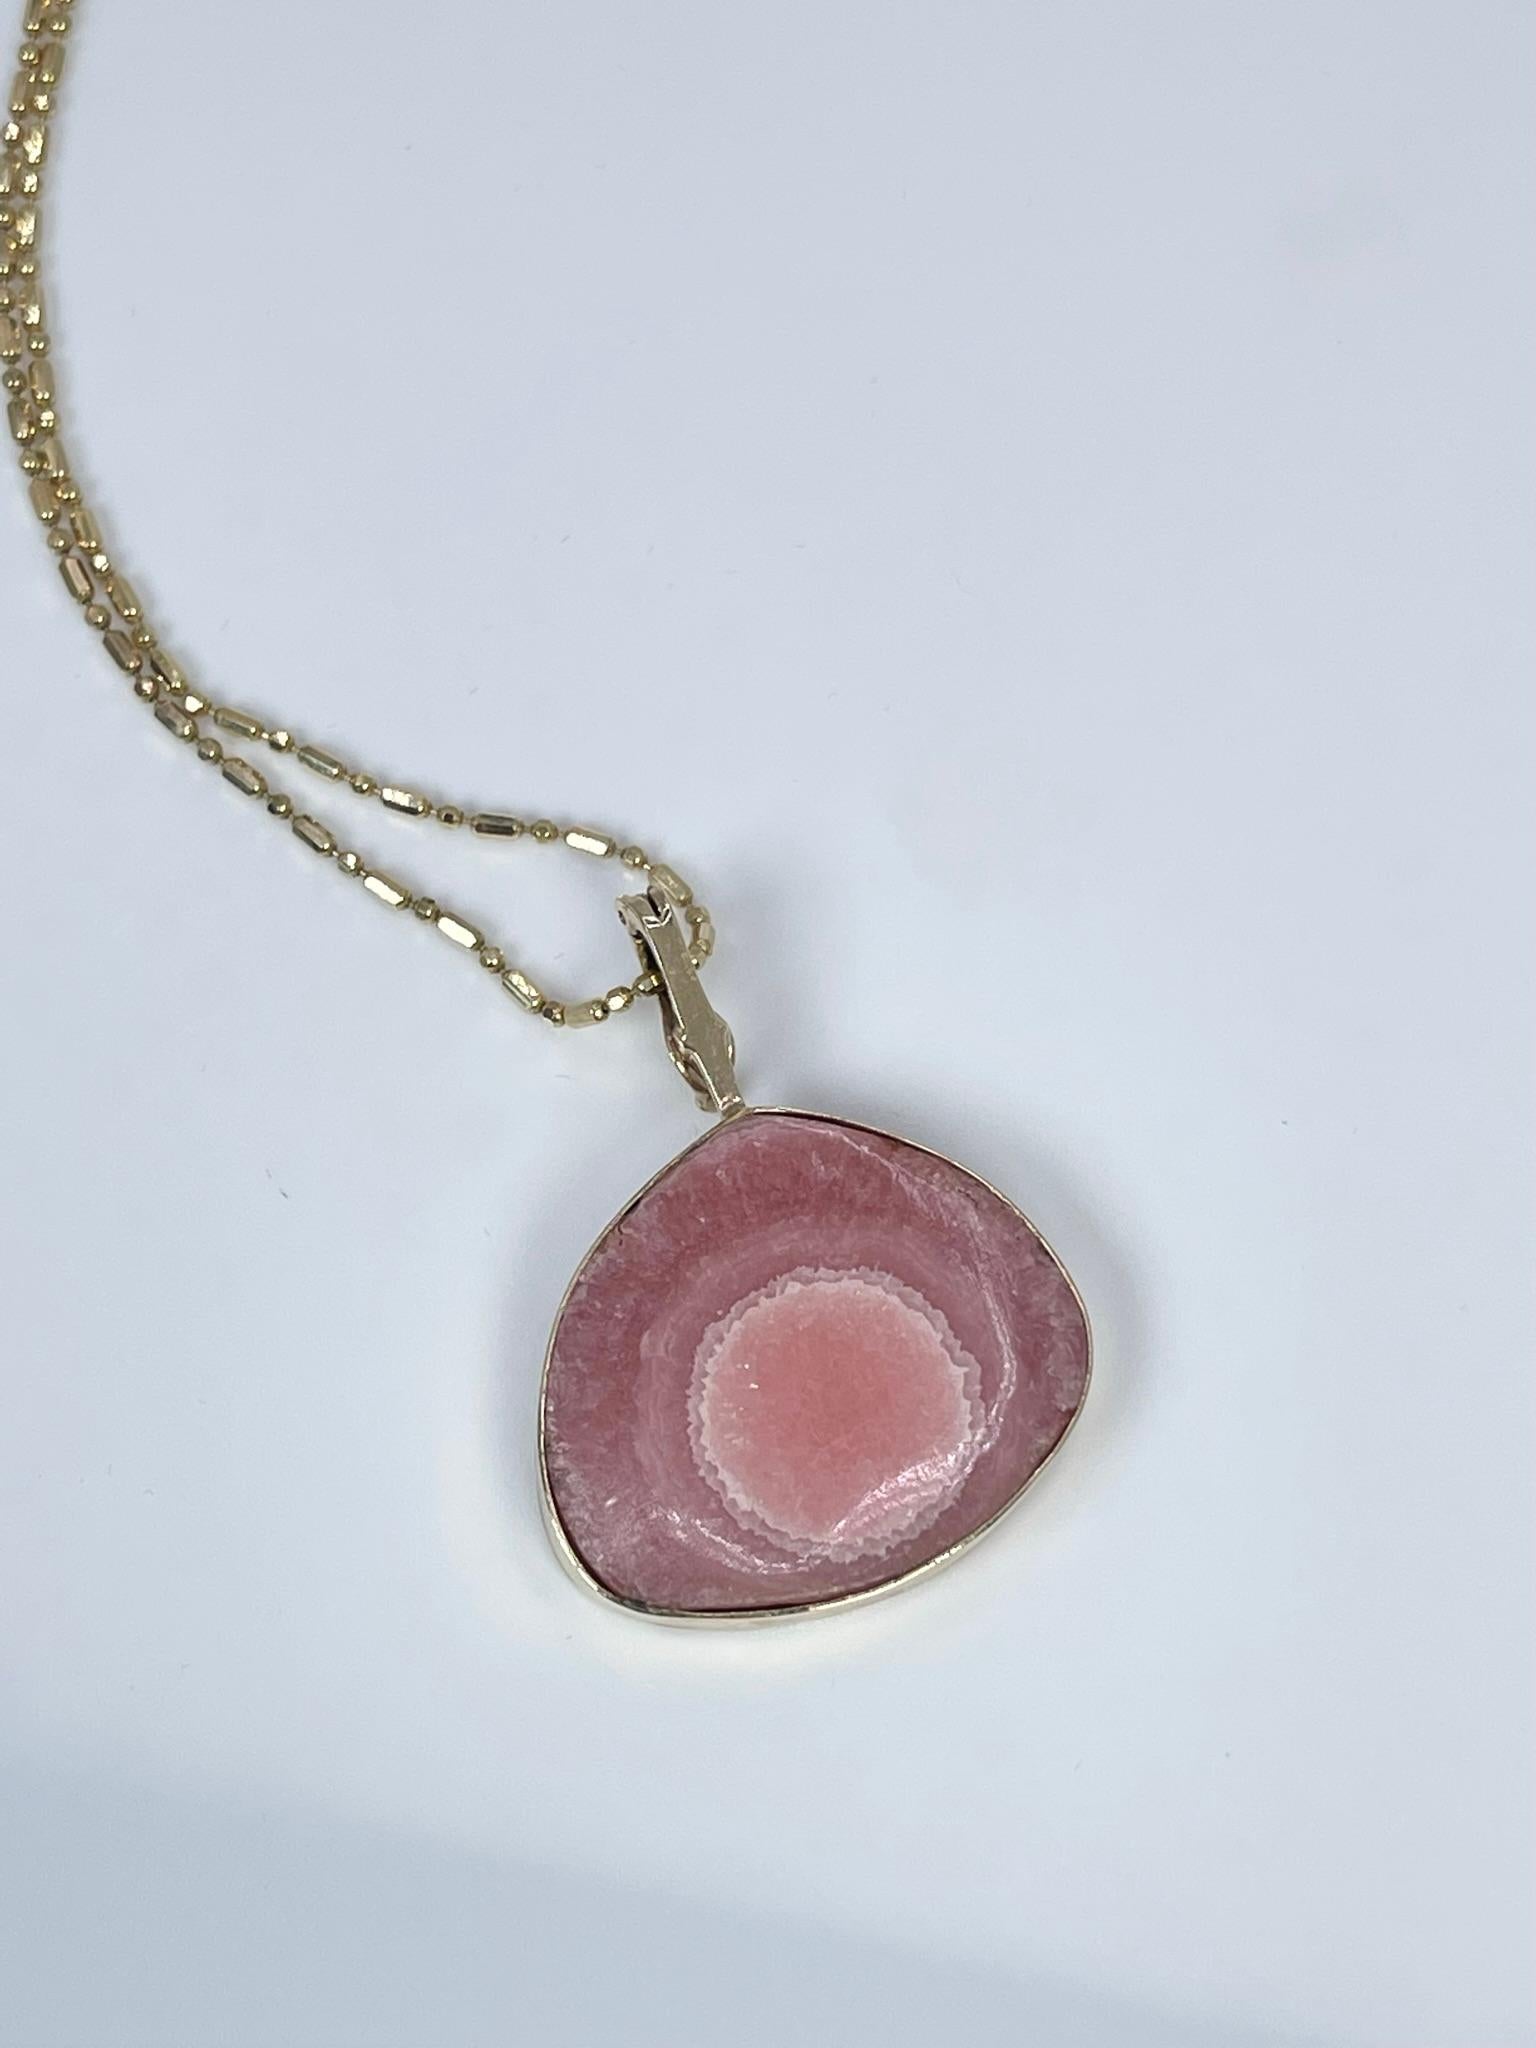 
Unique pink agate pendant necklace in 14KT yellow gold.

GRAM WEIGHT: 16.10gr
GOLD: 14KT yellow gold
Length: 20